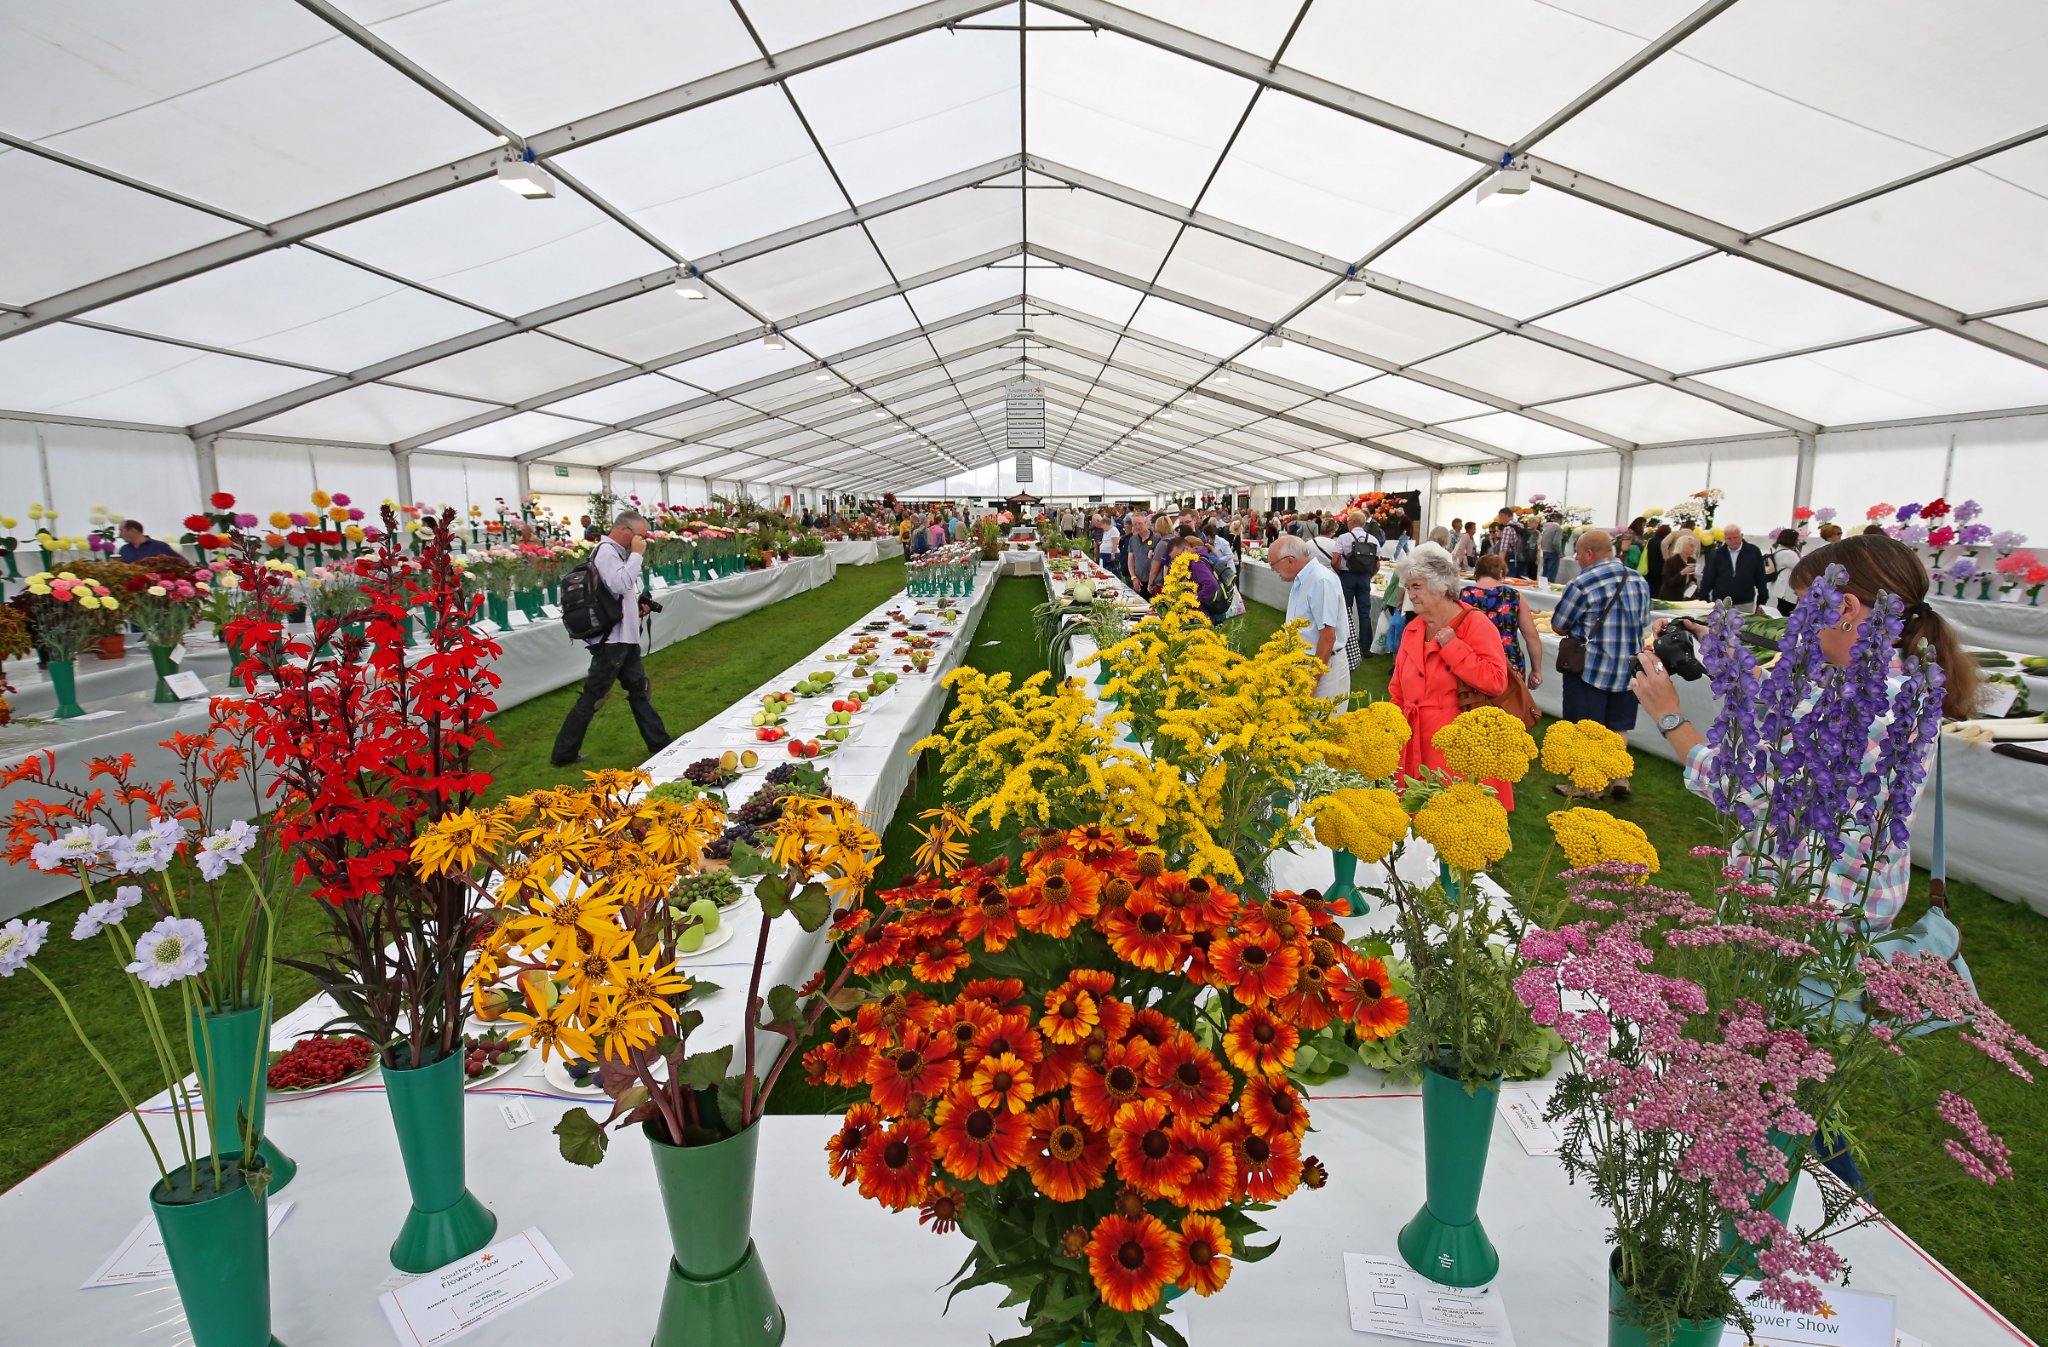 The Amateur Marquee at Southport Flower Show 